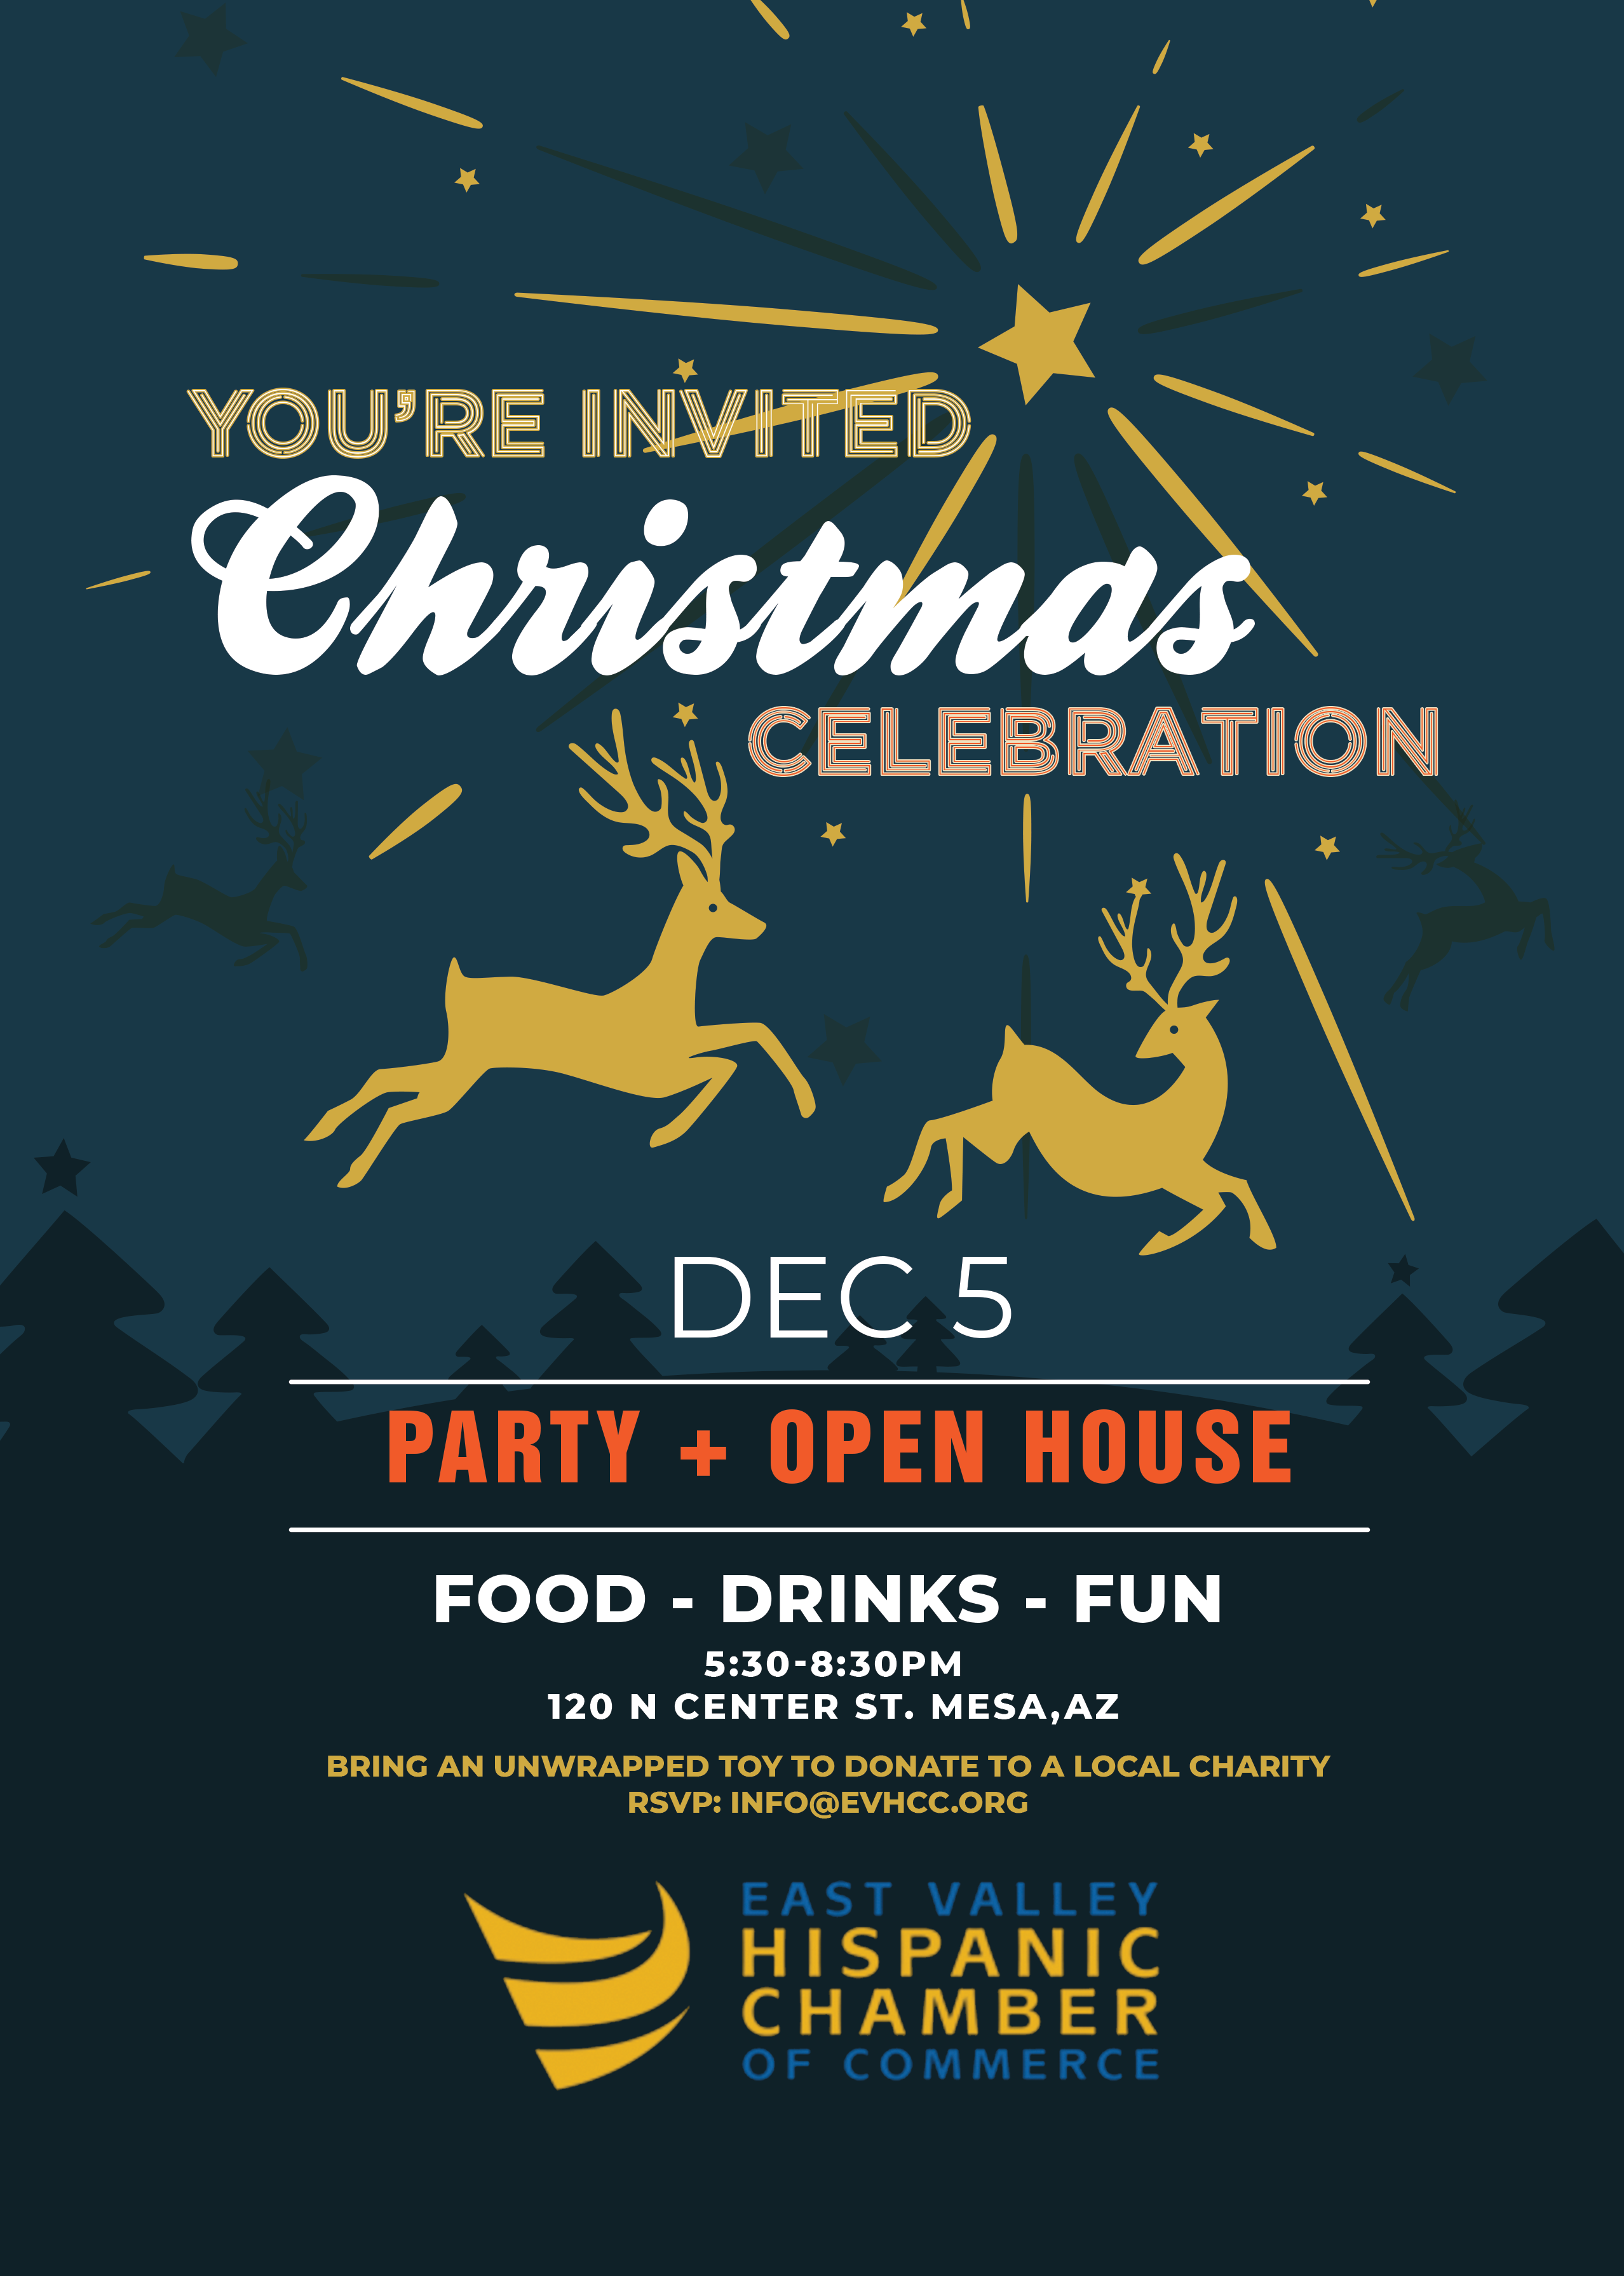 Christmas Celebration Dec 5, 2019 by the East Valley Hispanic Chamber of Commerce